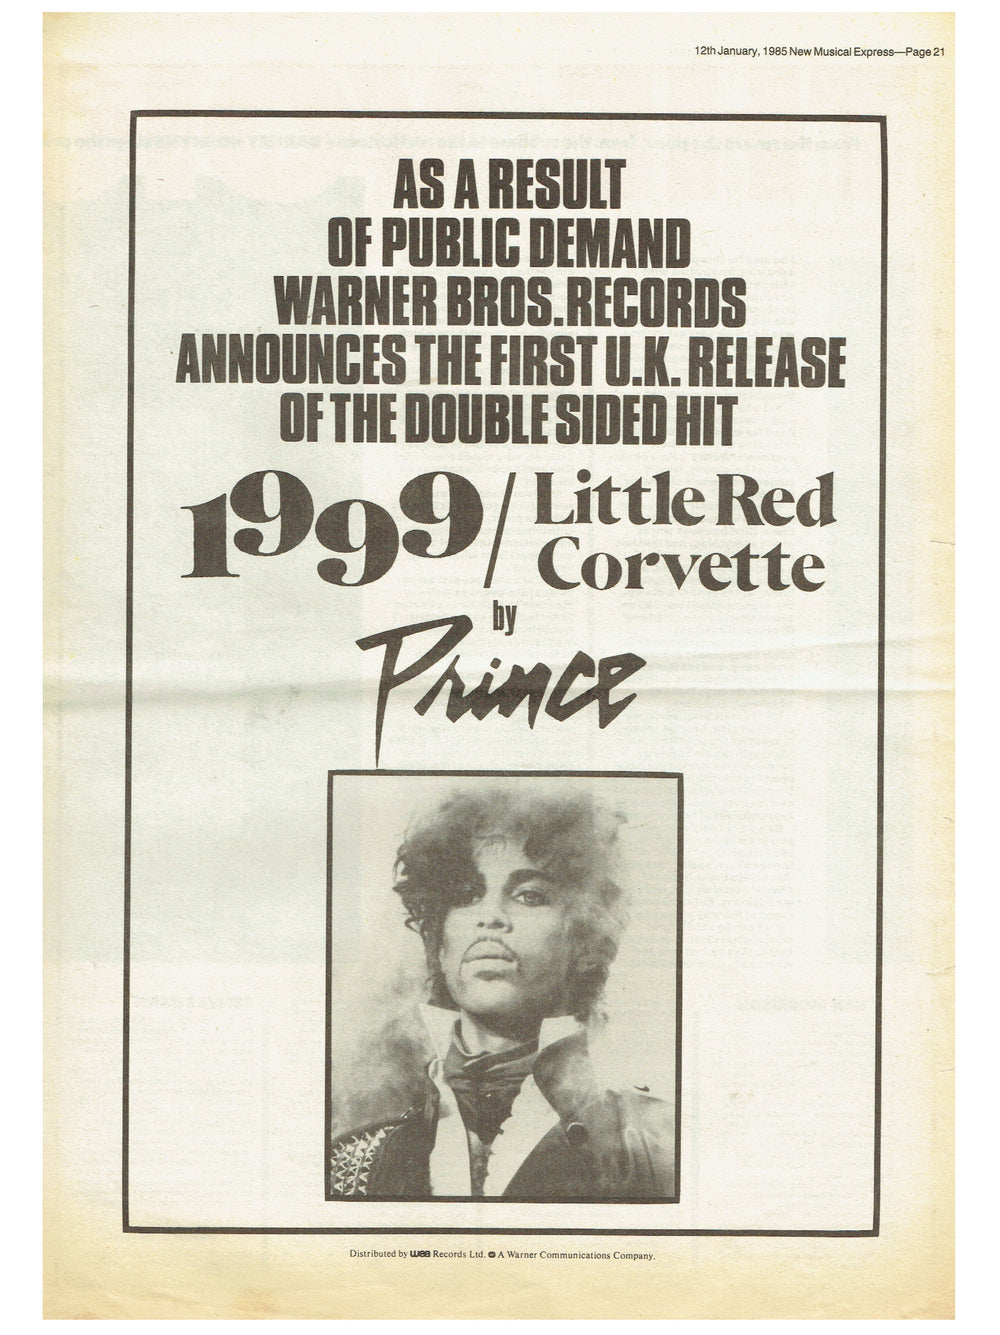 Prince – 1999 Little Red Corvette Full Page Advert Newspaper NME January 12th 1985